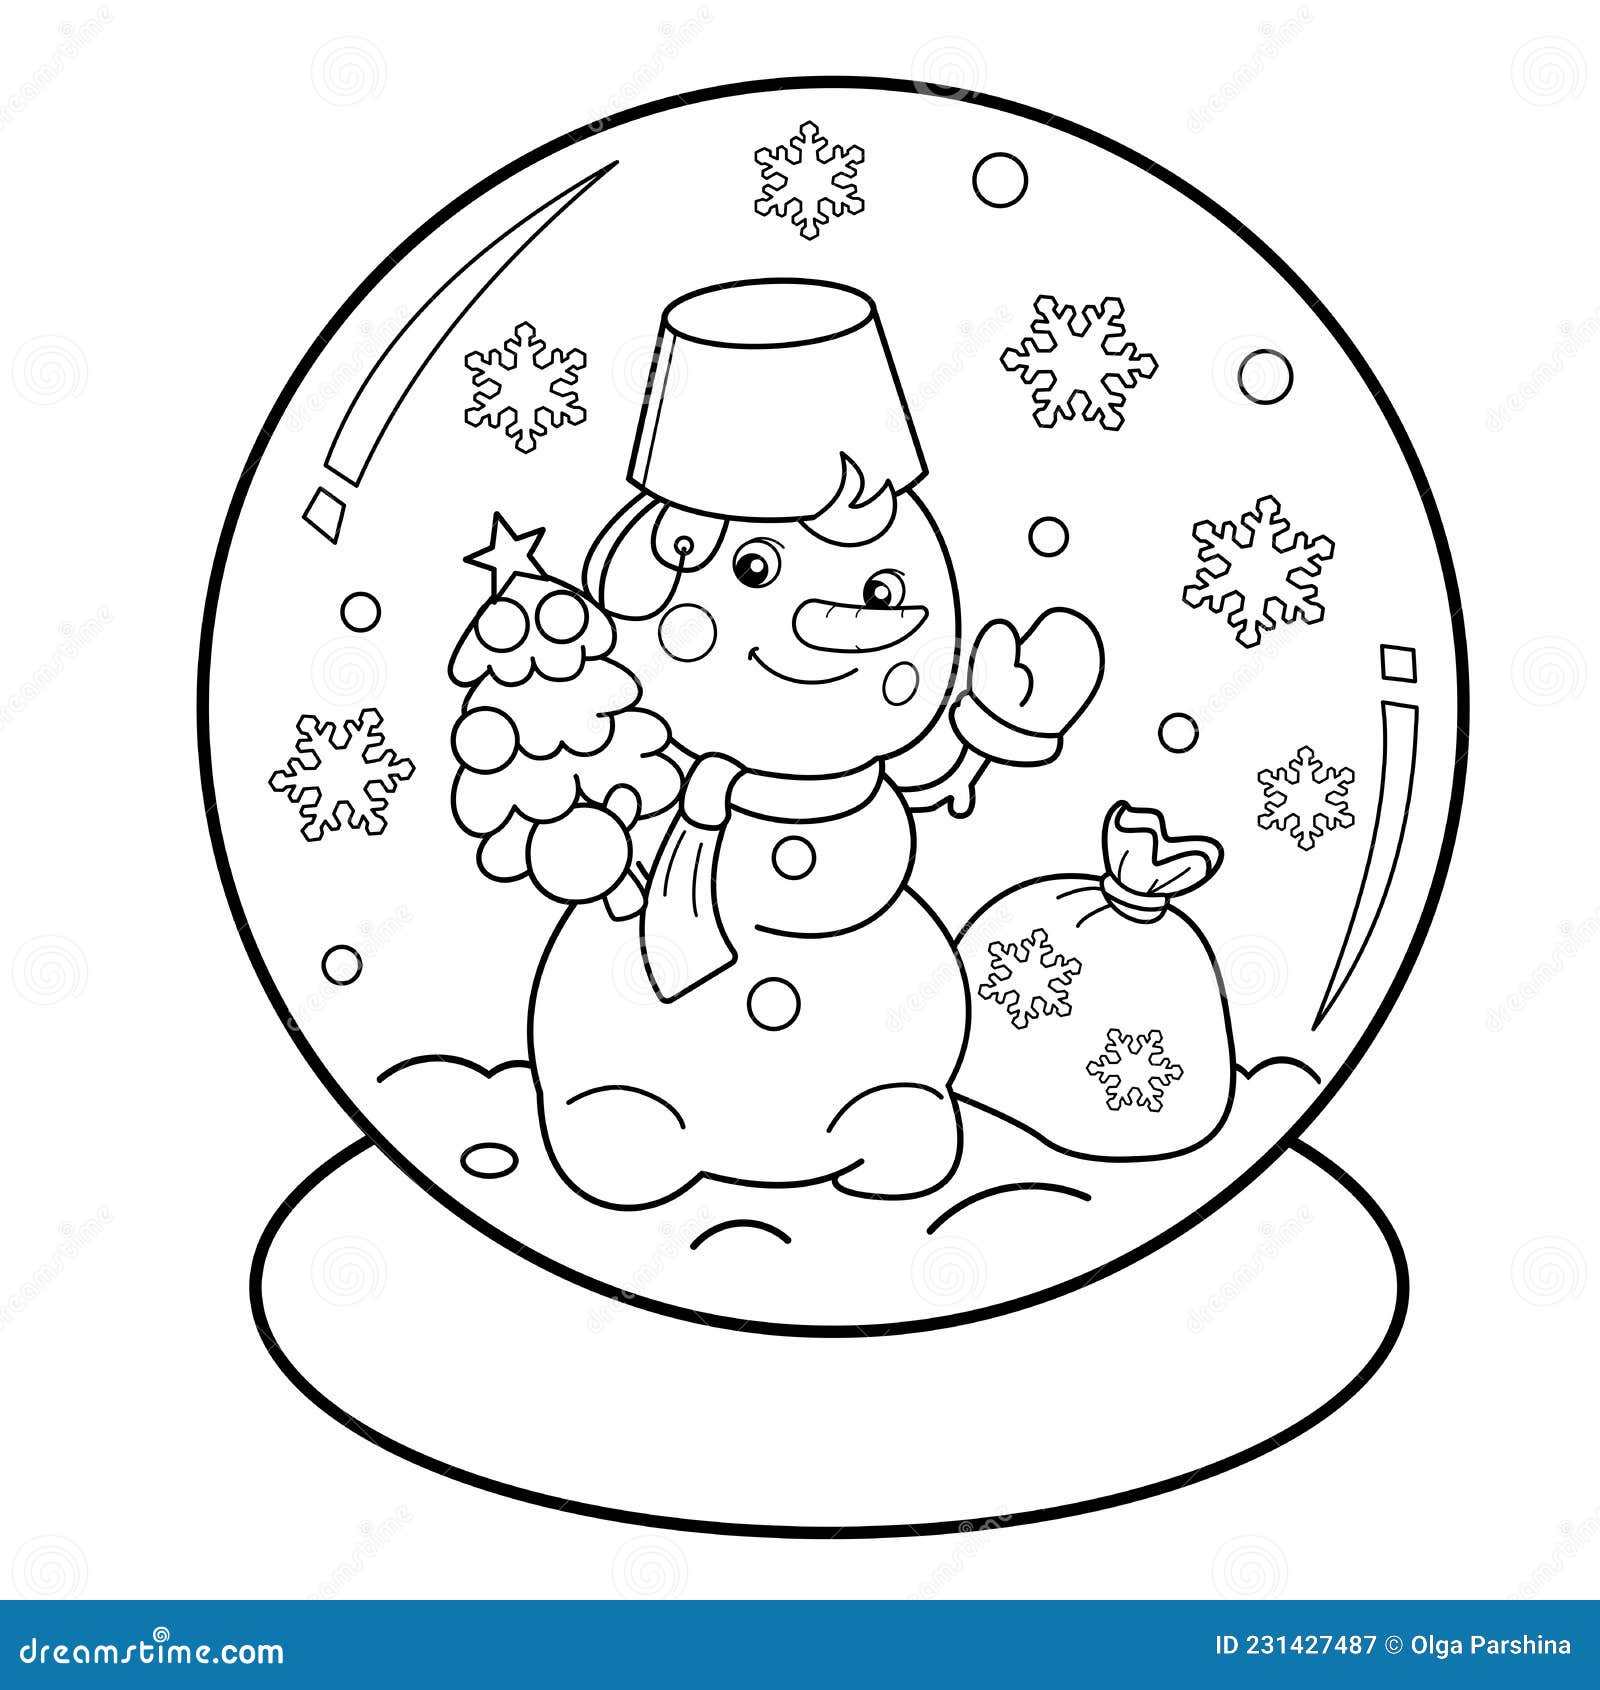 Coloring page outline of snow globe with snowman with gifts bag and christmas tree new year christmas stock vector